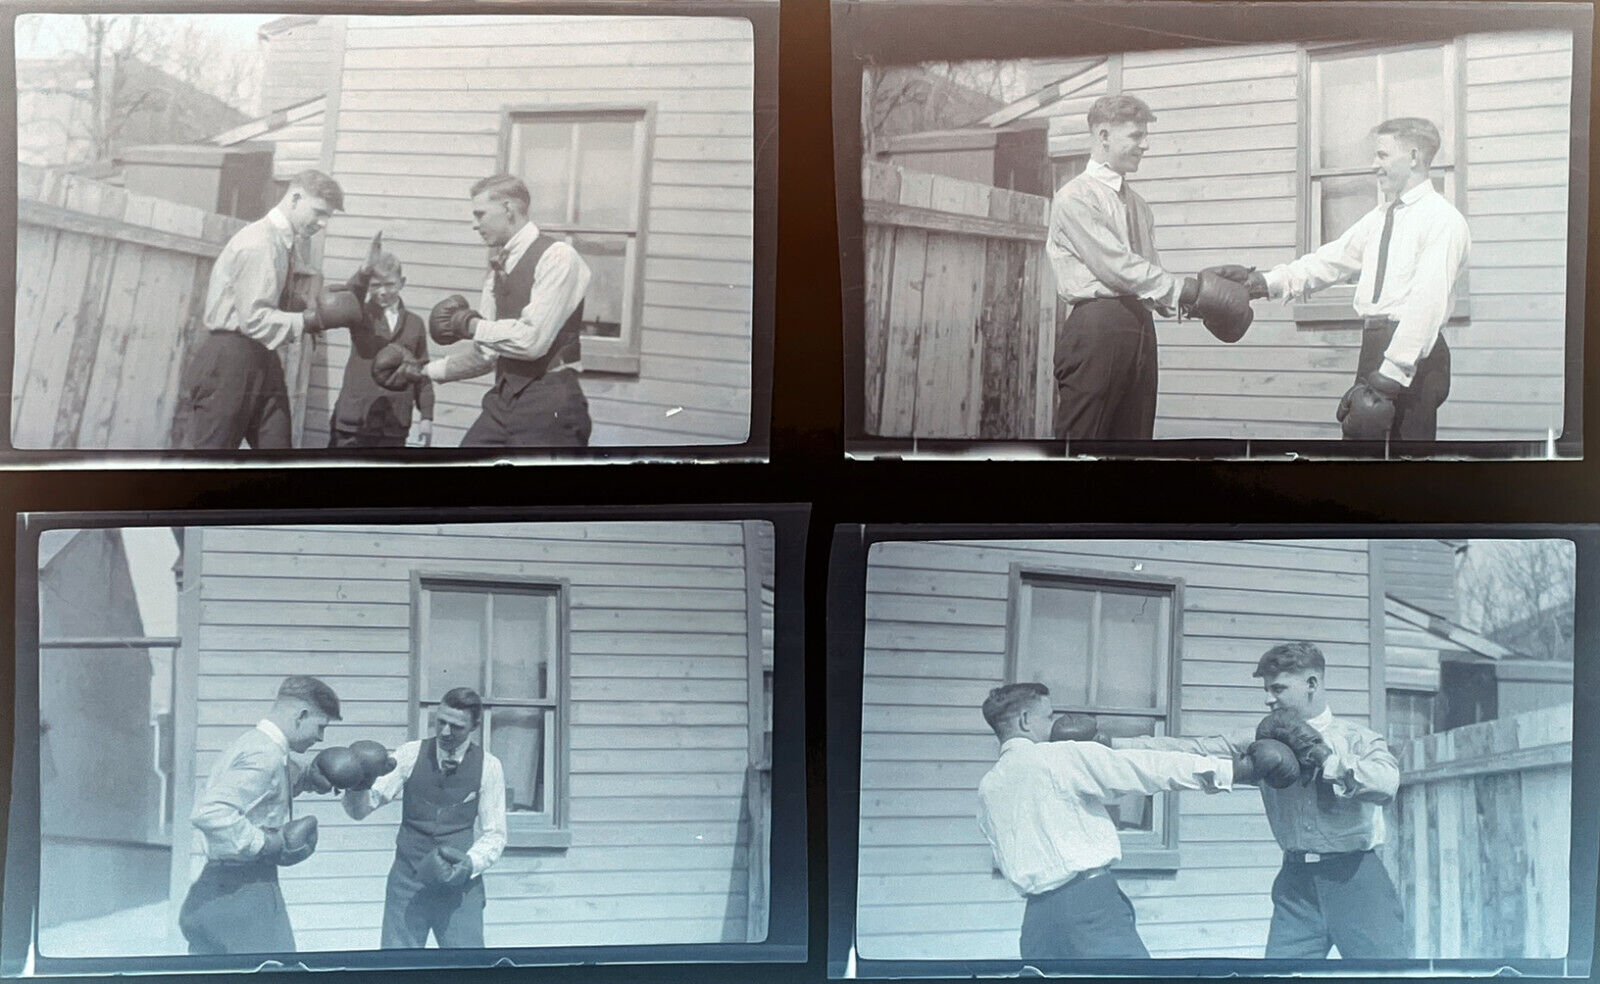 GREAT Vintage 1930s Photo Negatives Kids Boxing Sequence Play Fun Antique